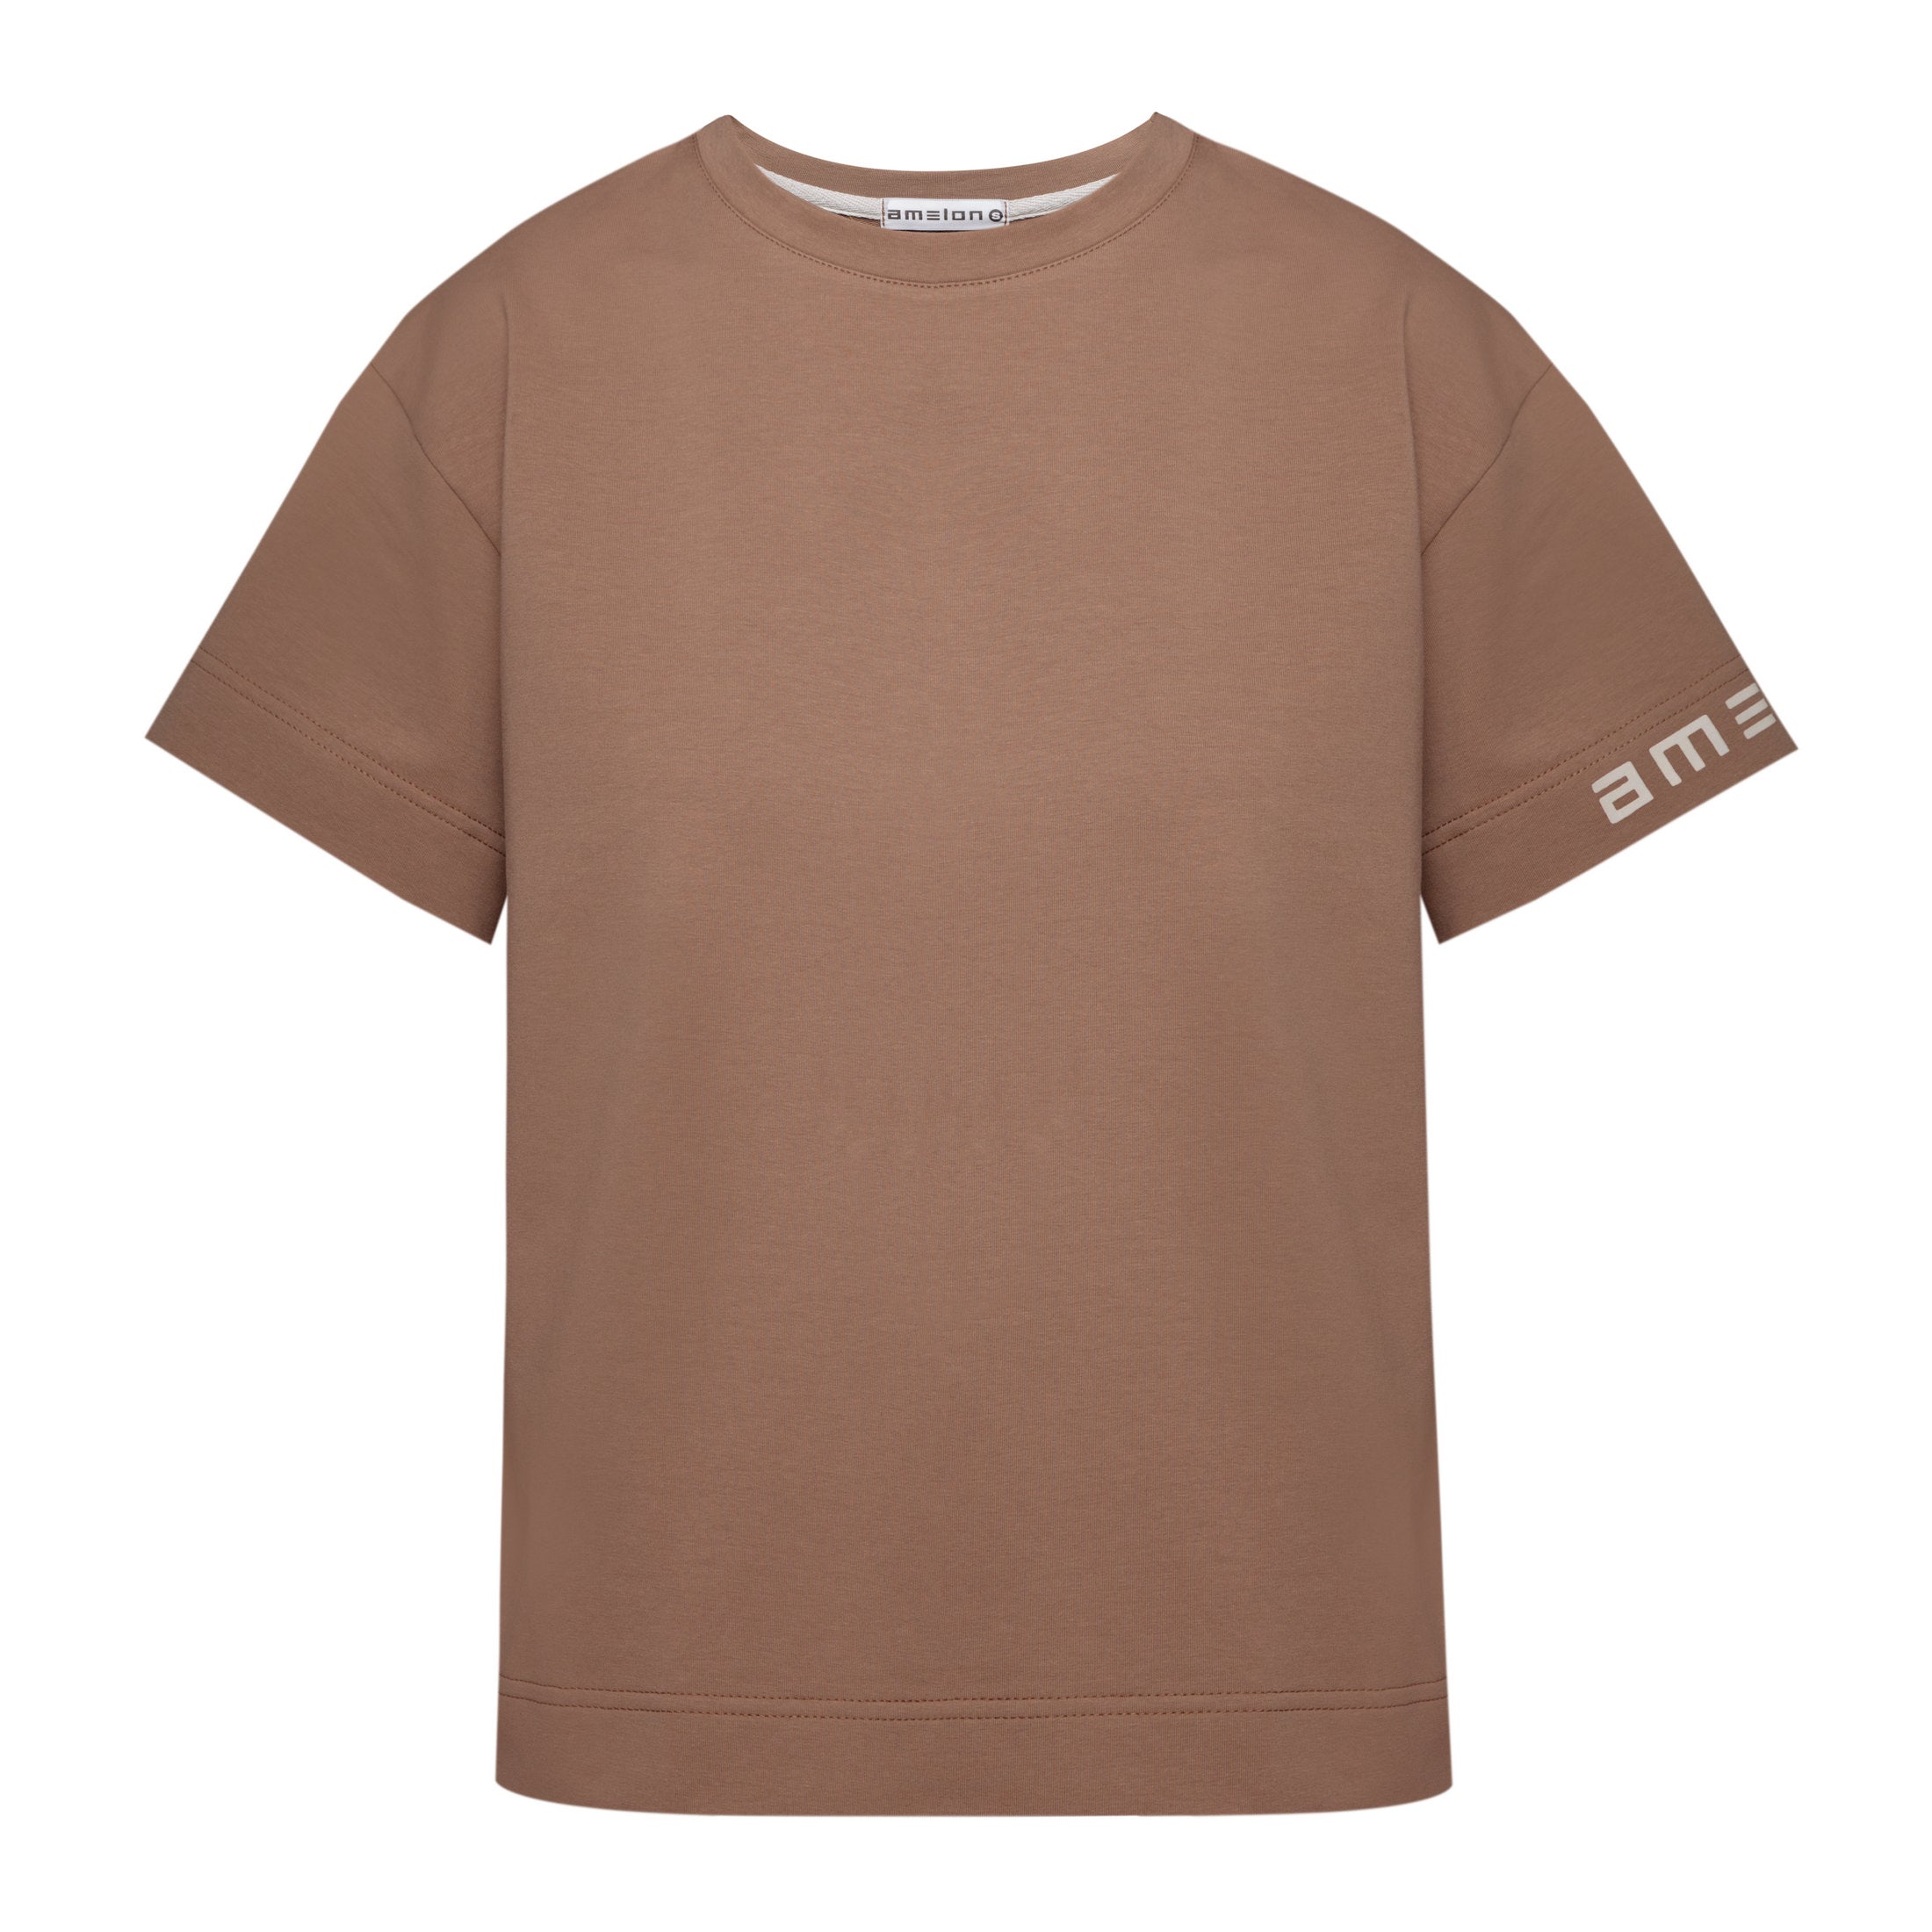 Straight women's T-shirt in beige color, logo on the sleeve